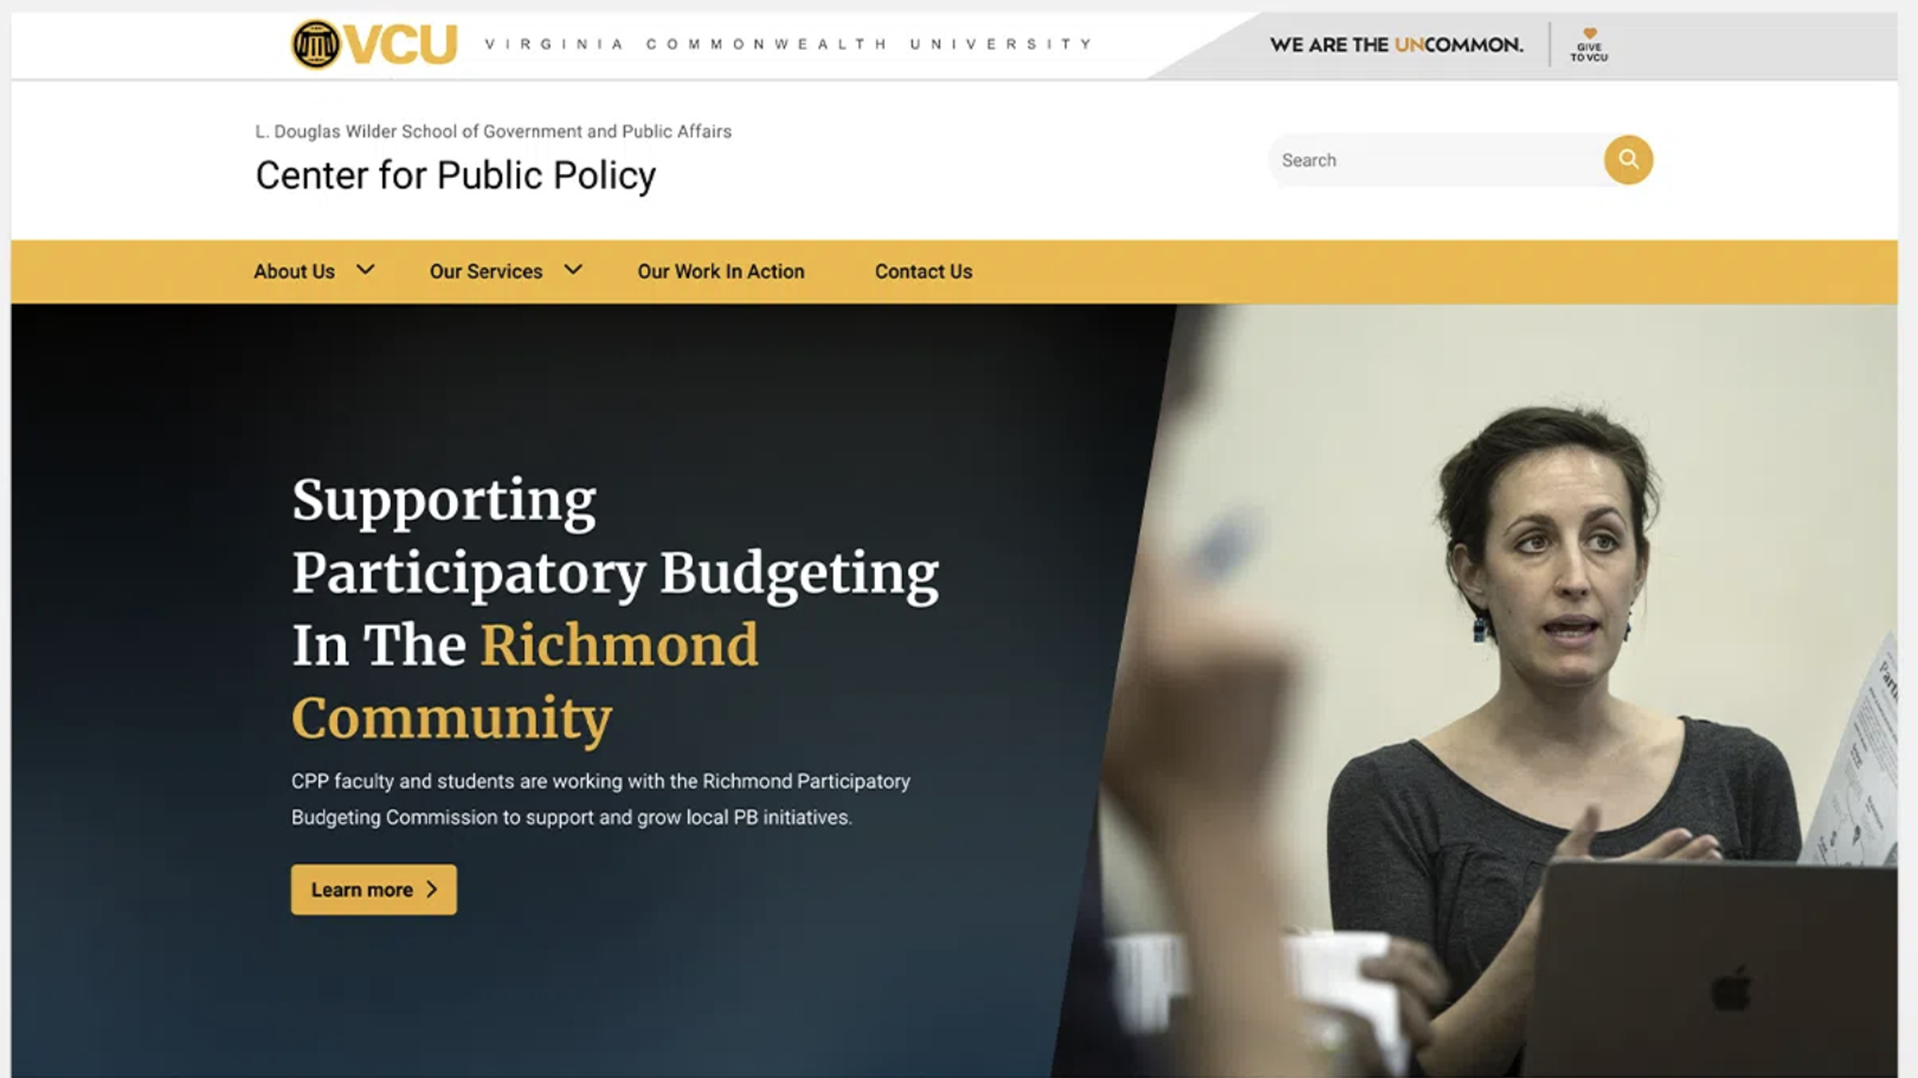 Web strategy and content for VCU Public Policy